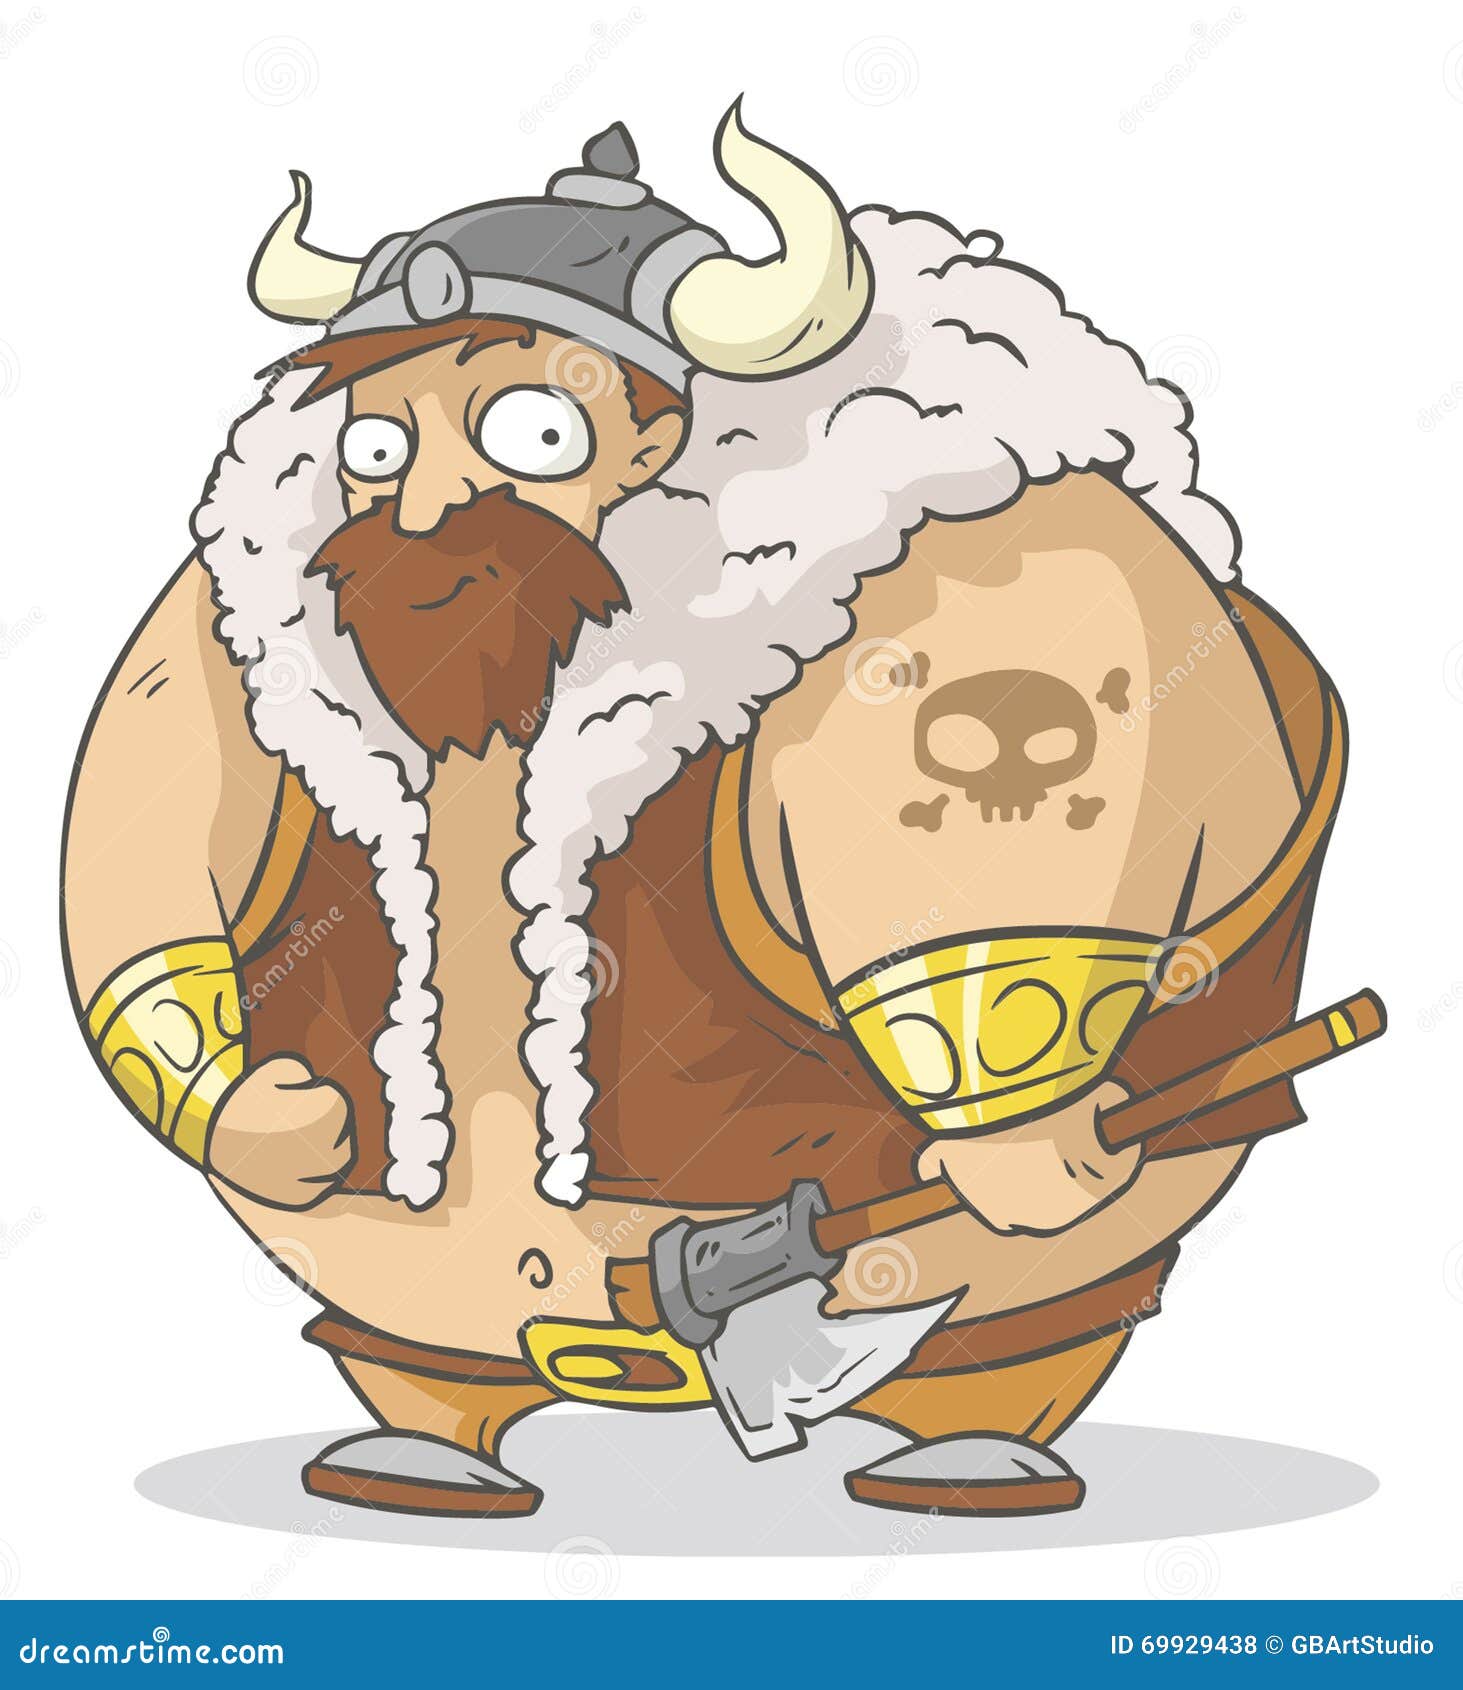 Big viking stock vector. Illustration of drawing, leather - 69929438